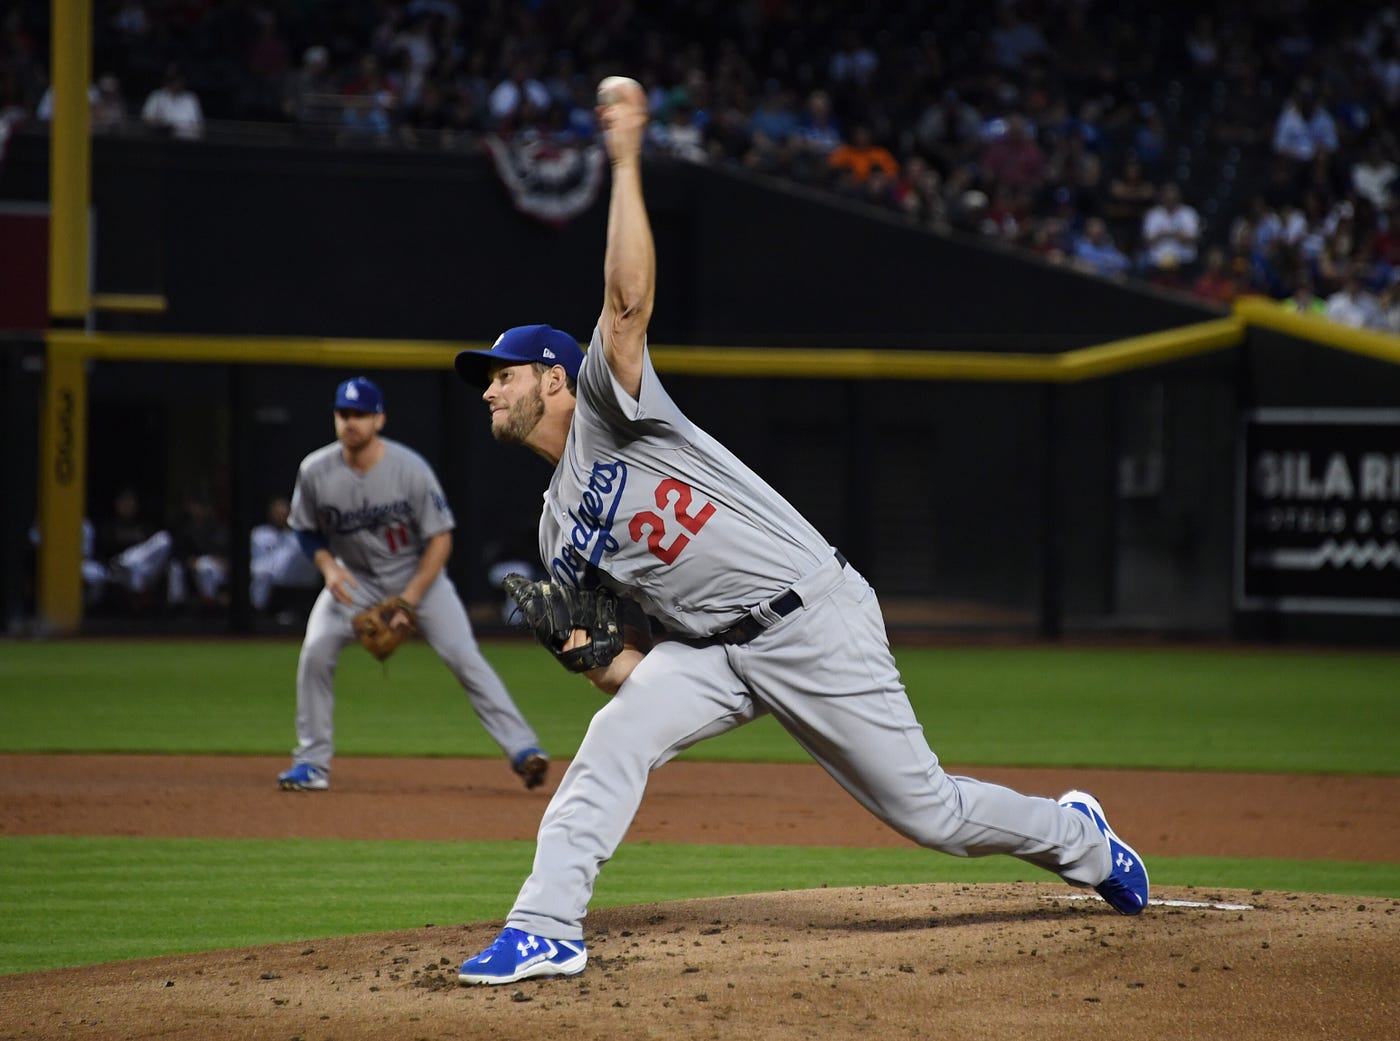 For Kershaw, All-Star Game start is a moment he made, by Cary Osborne